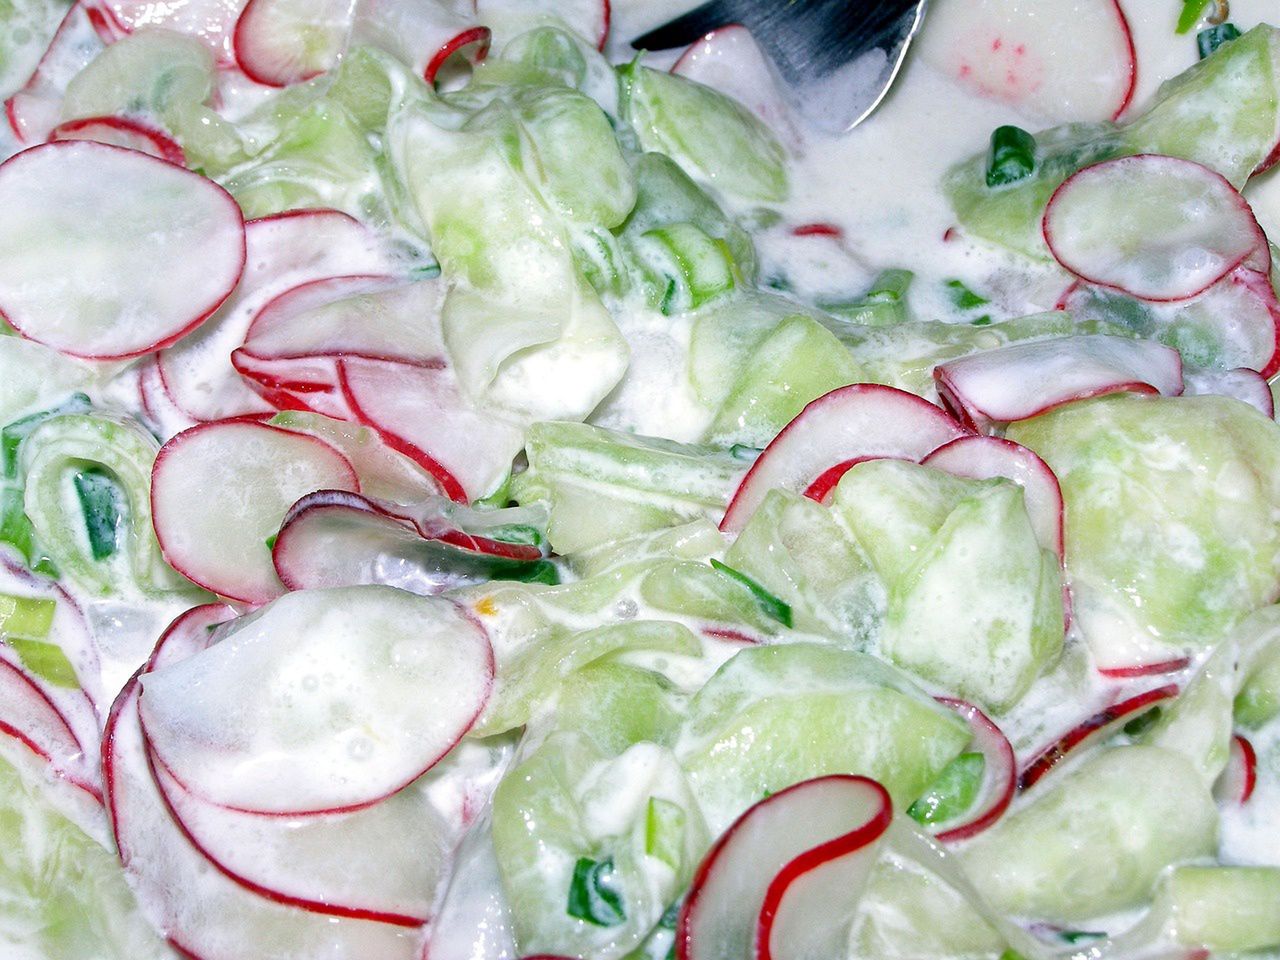 What to do to make cucumber salad watery?